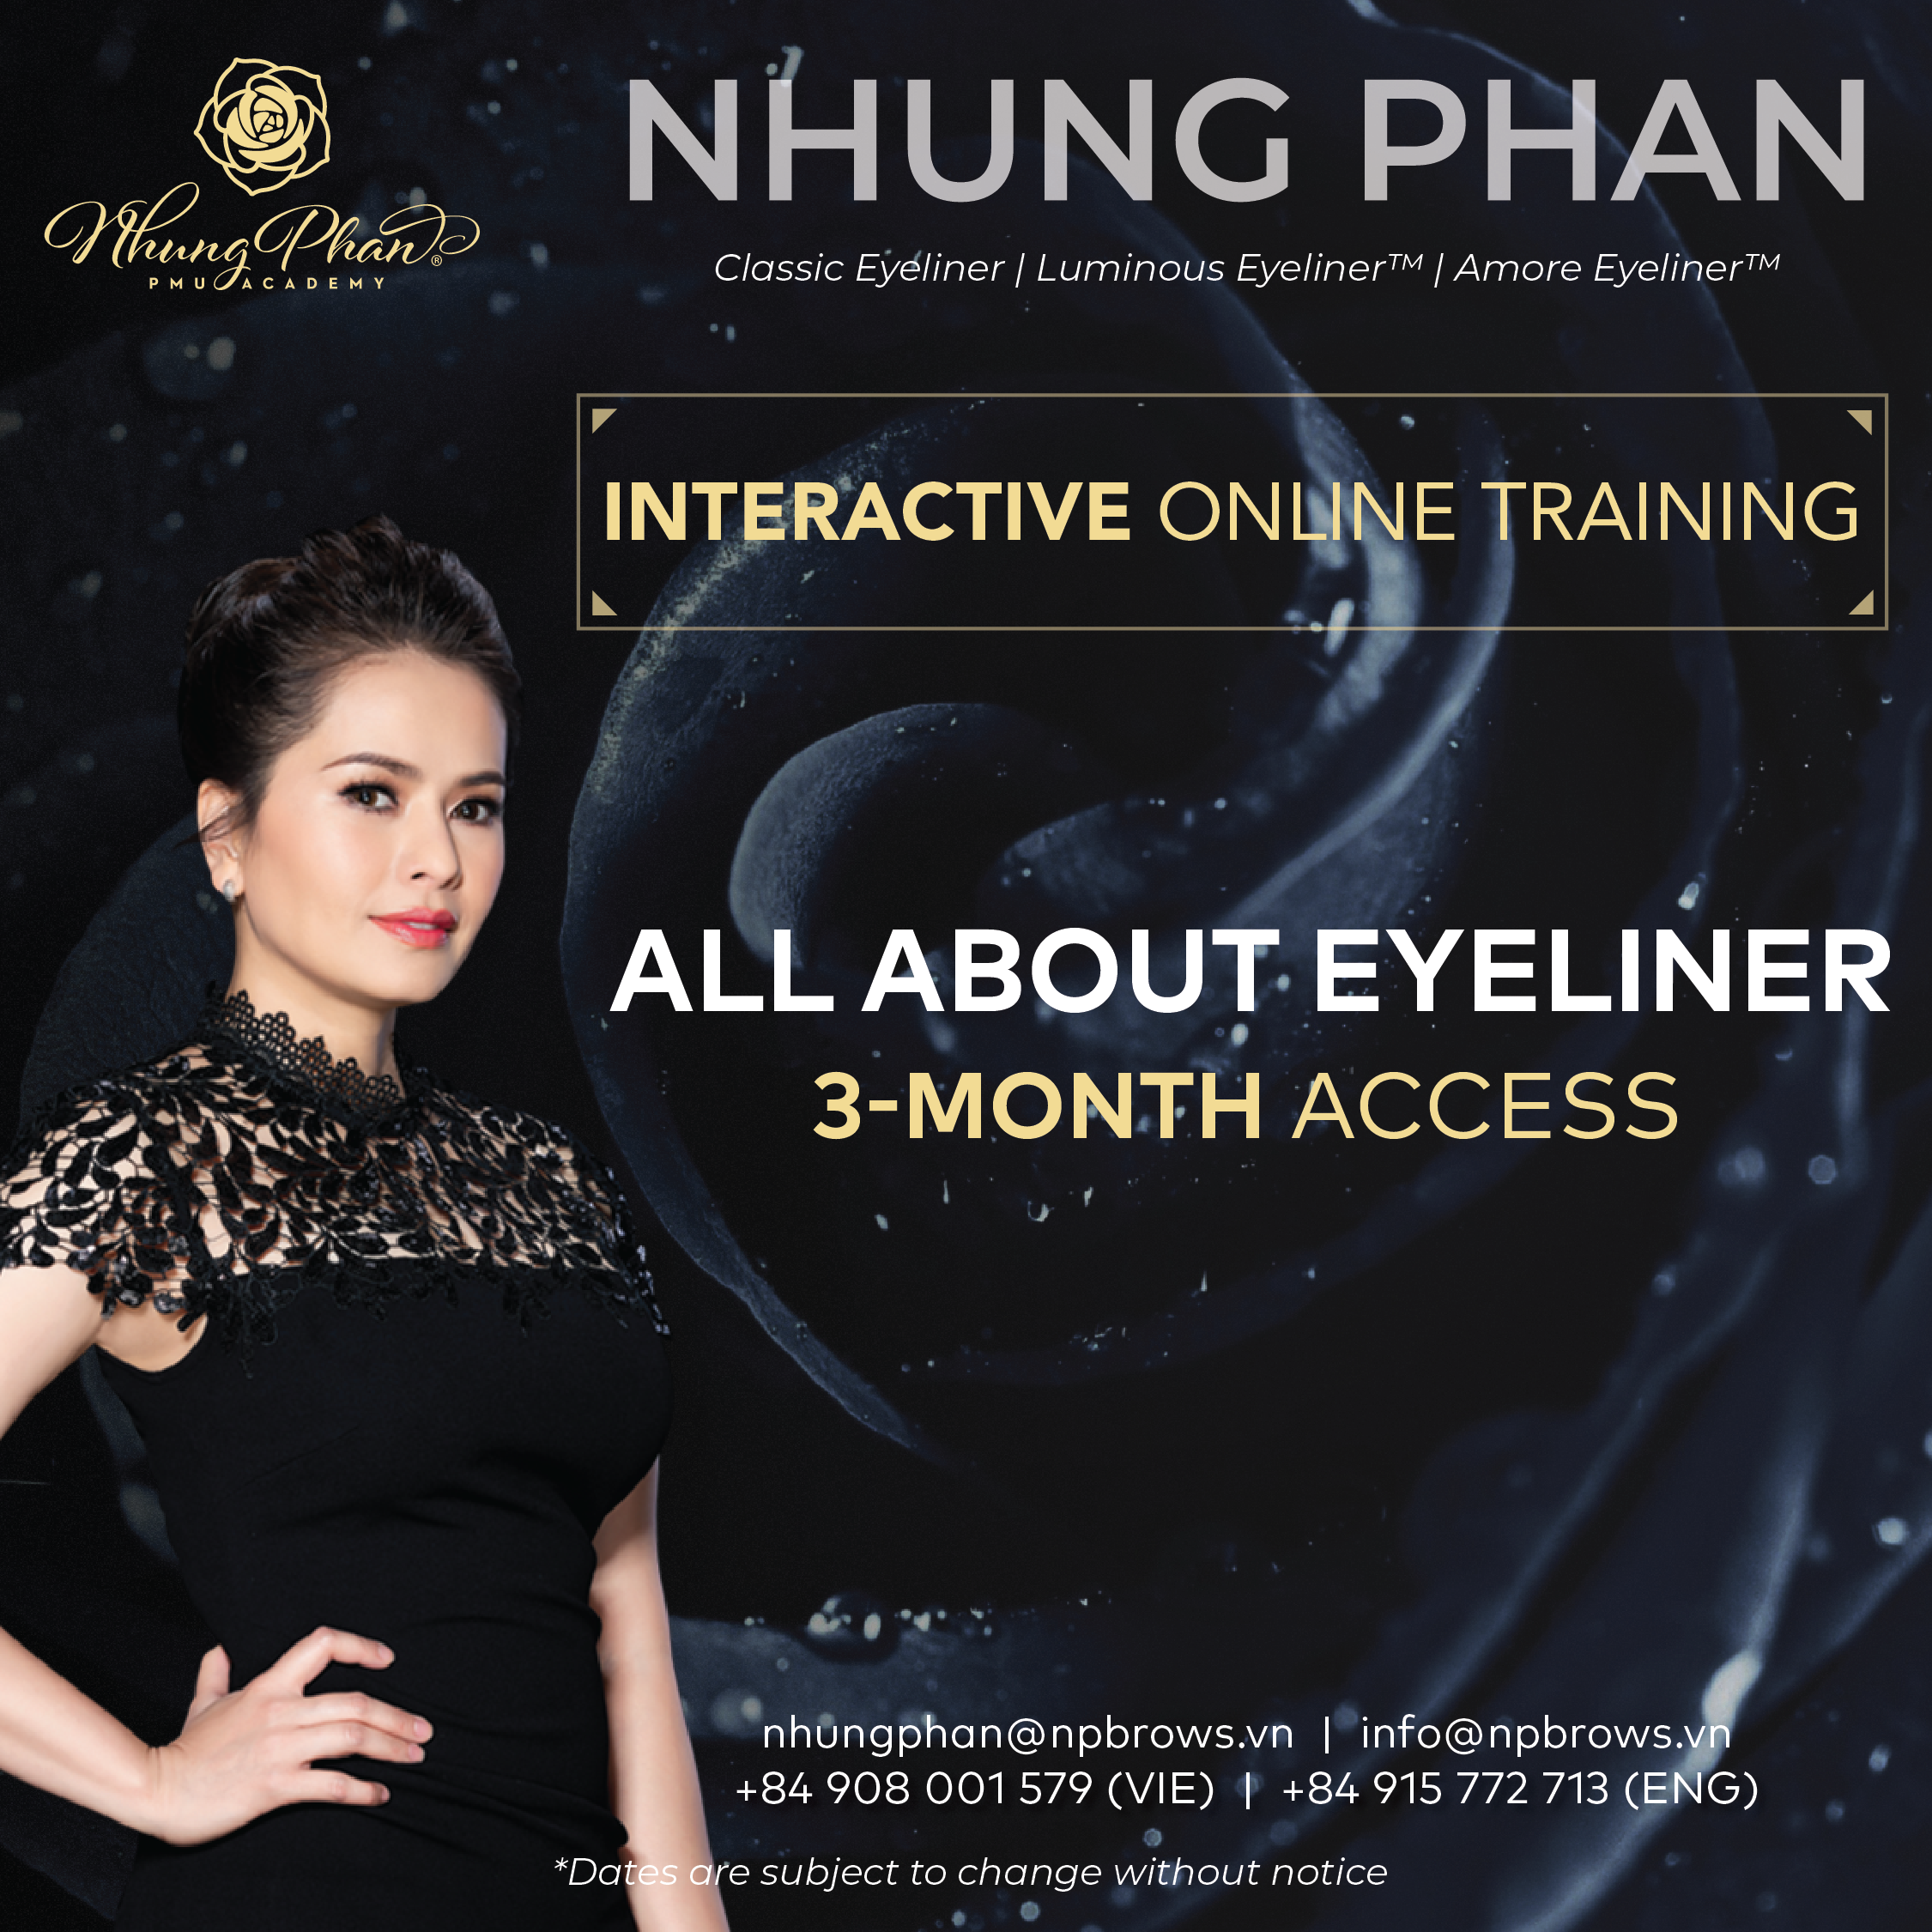 3-month access All About Eyeliner Online Course Video Library